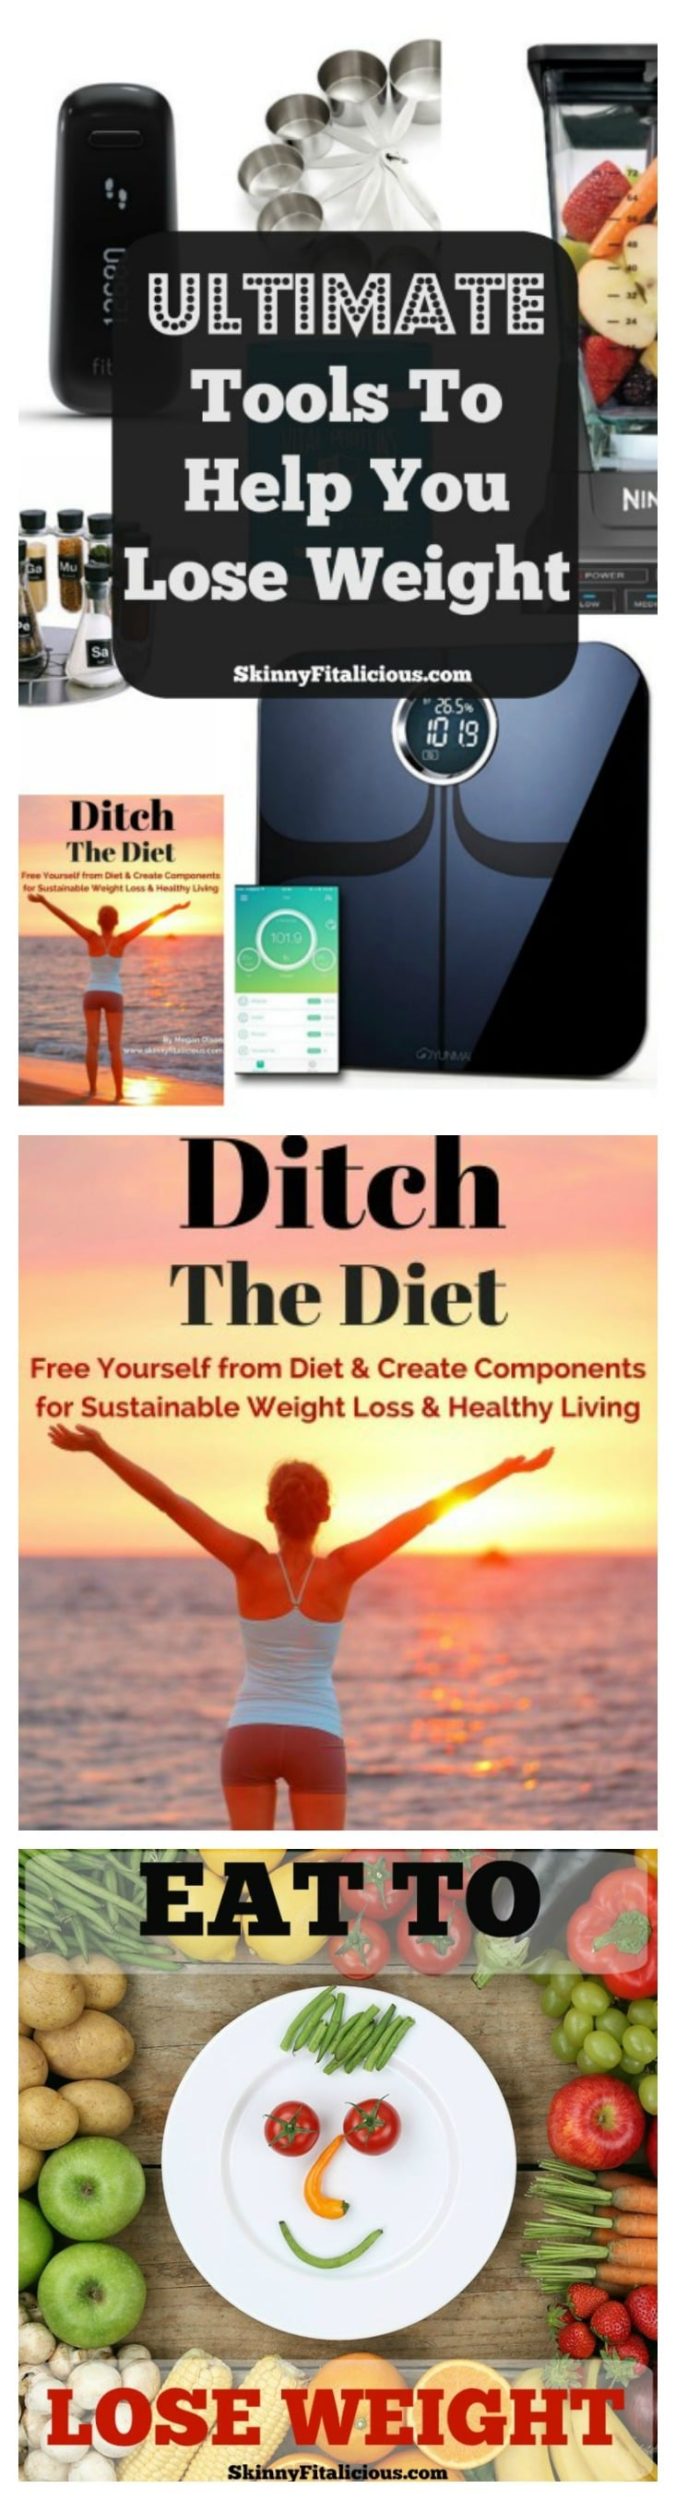 Ultimate Tools To Help You Lose Weight - Skinny Fitalicious®